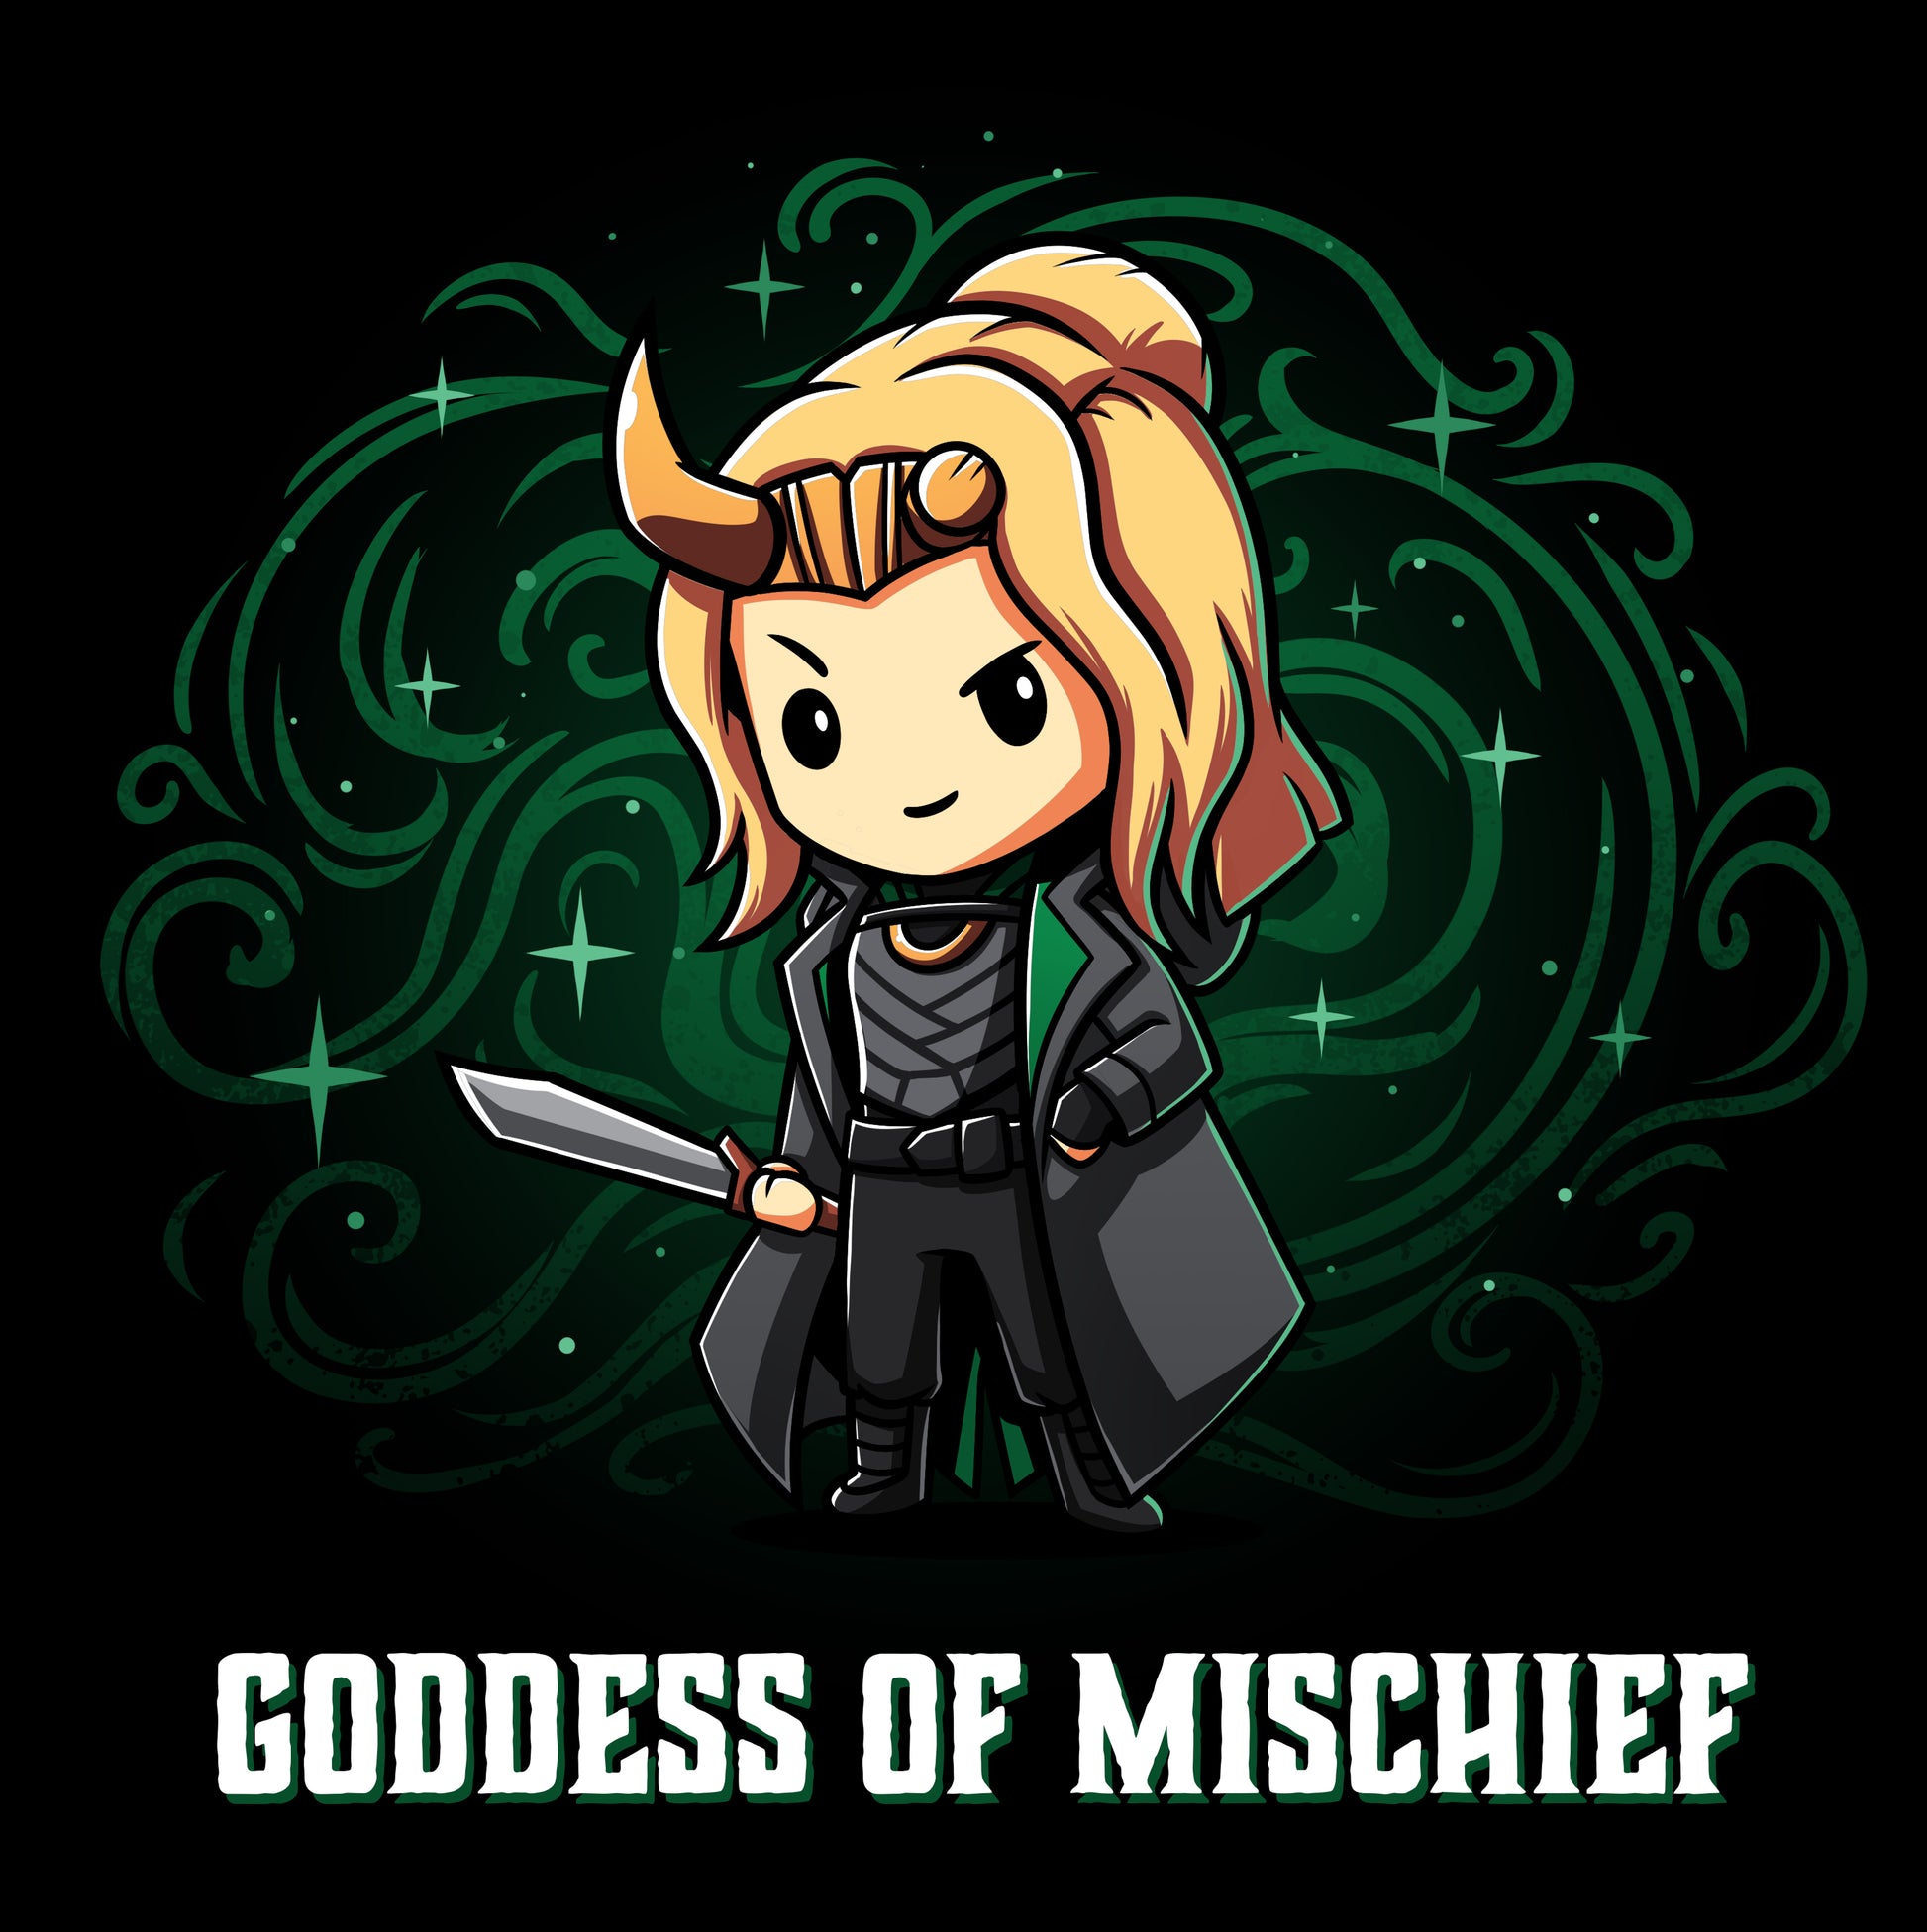 Marvel licensed t-shirt featuring Sylvie Goddess of Mischief by Marvel.